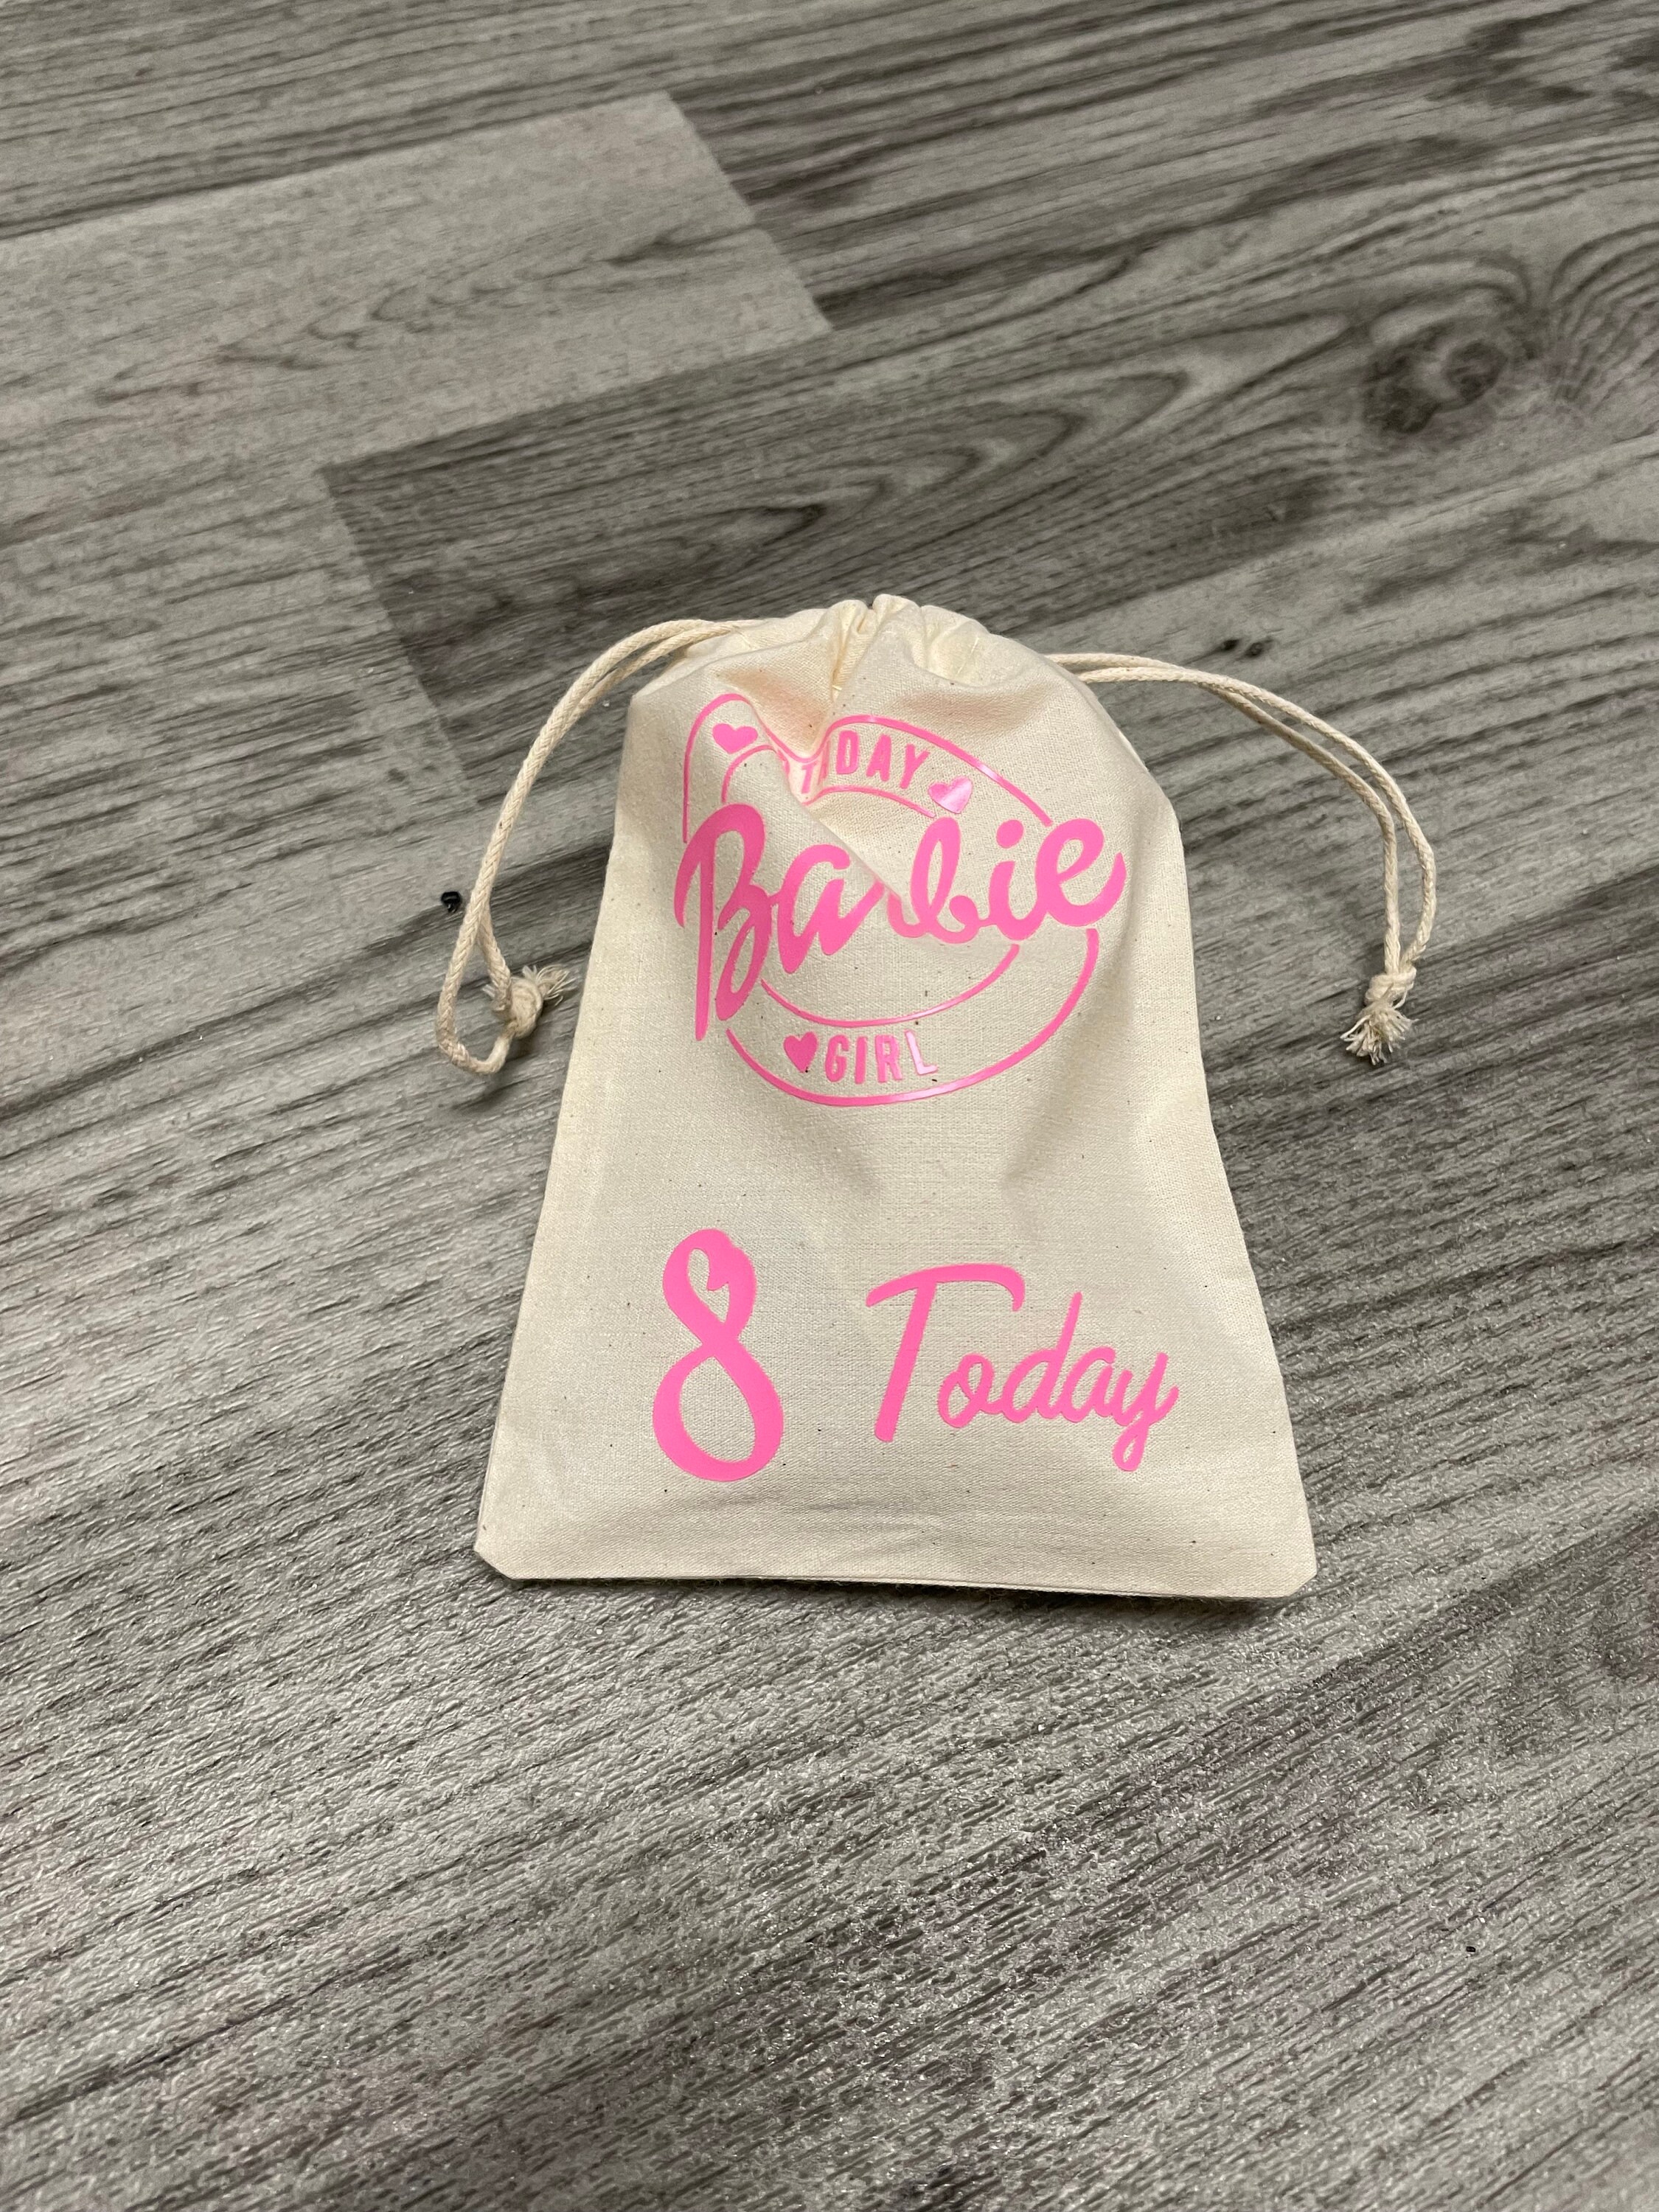 Party bags | barbie inspired birthday bag | personalise you own bags